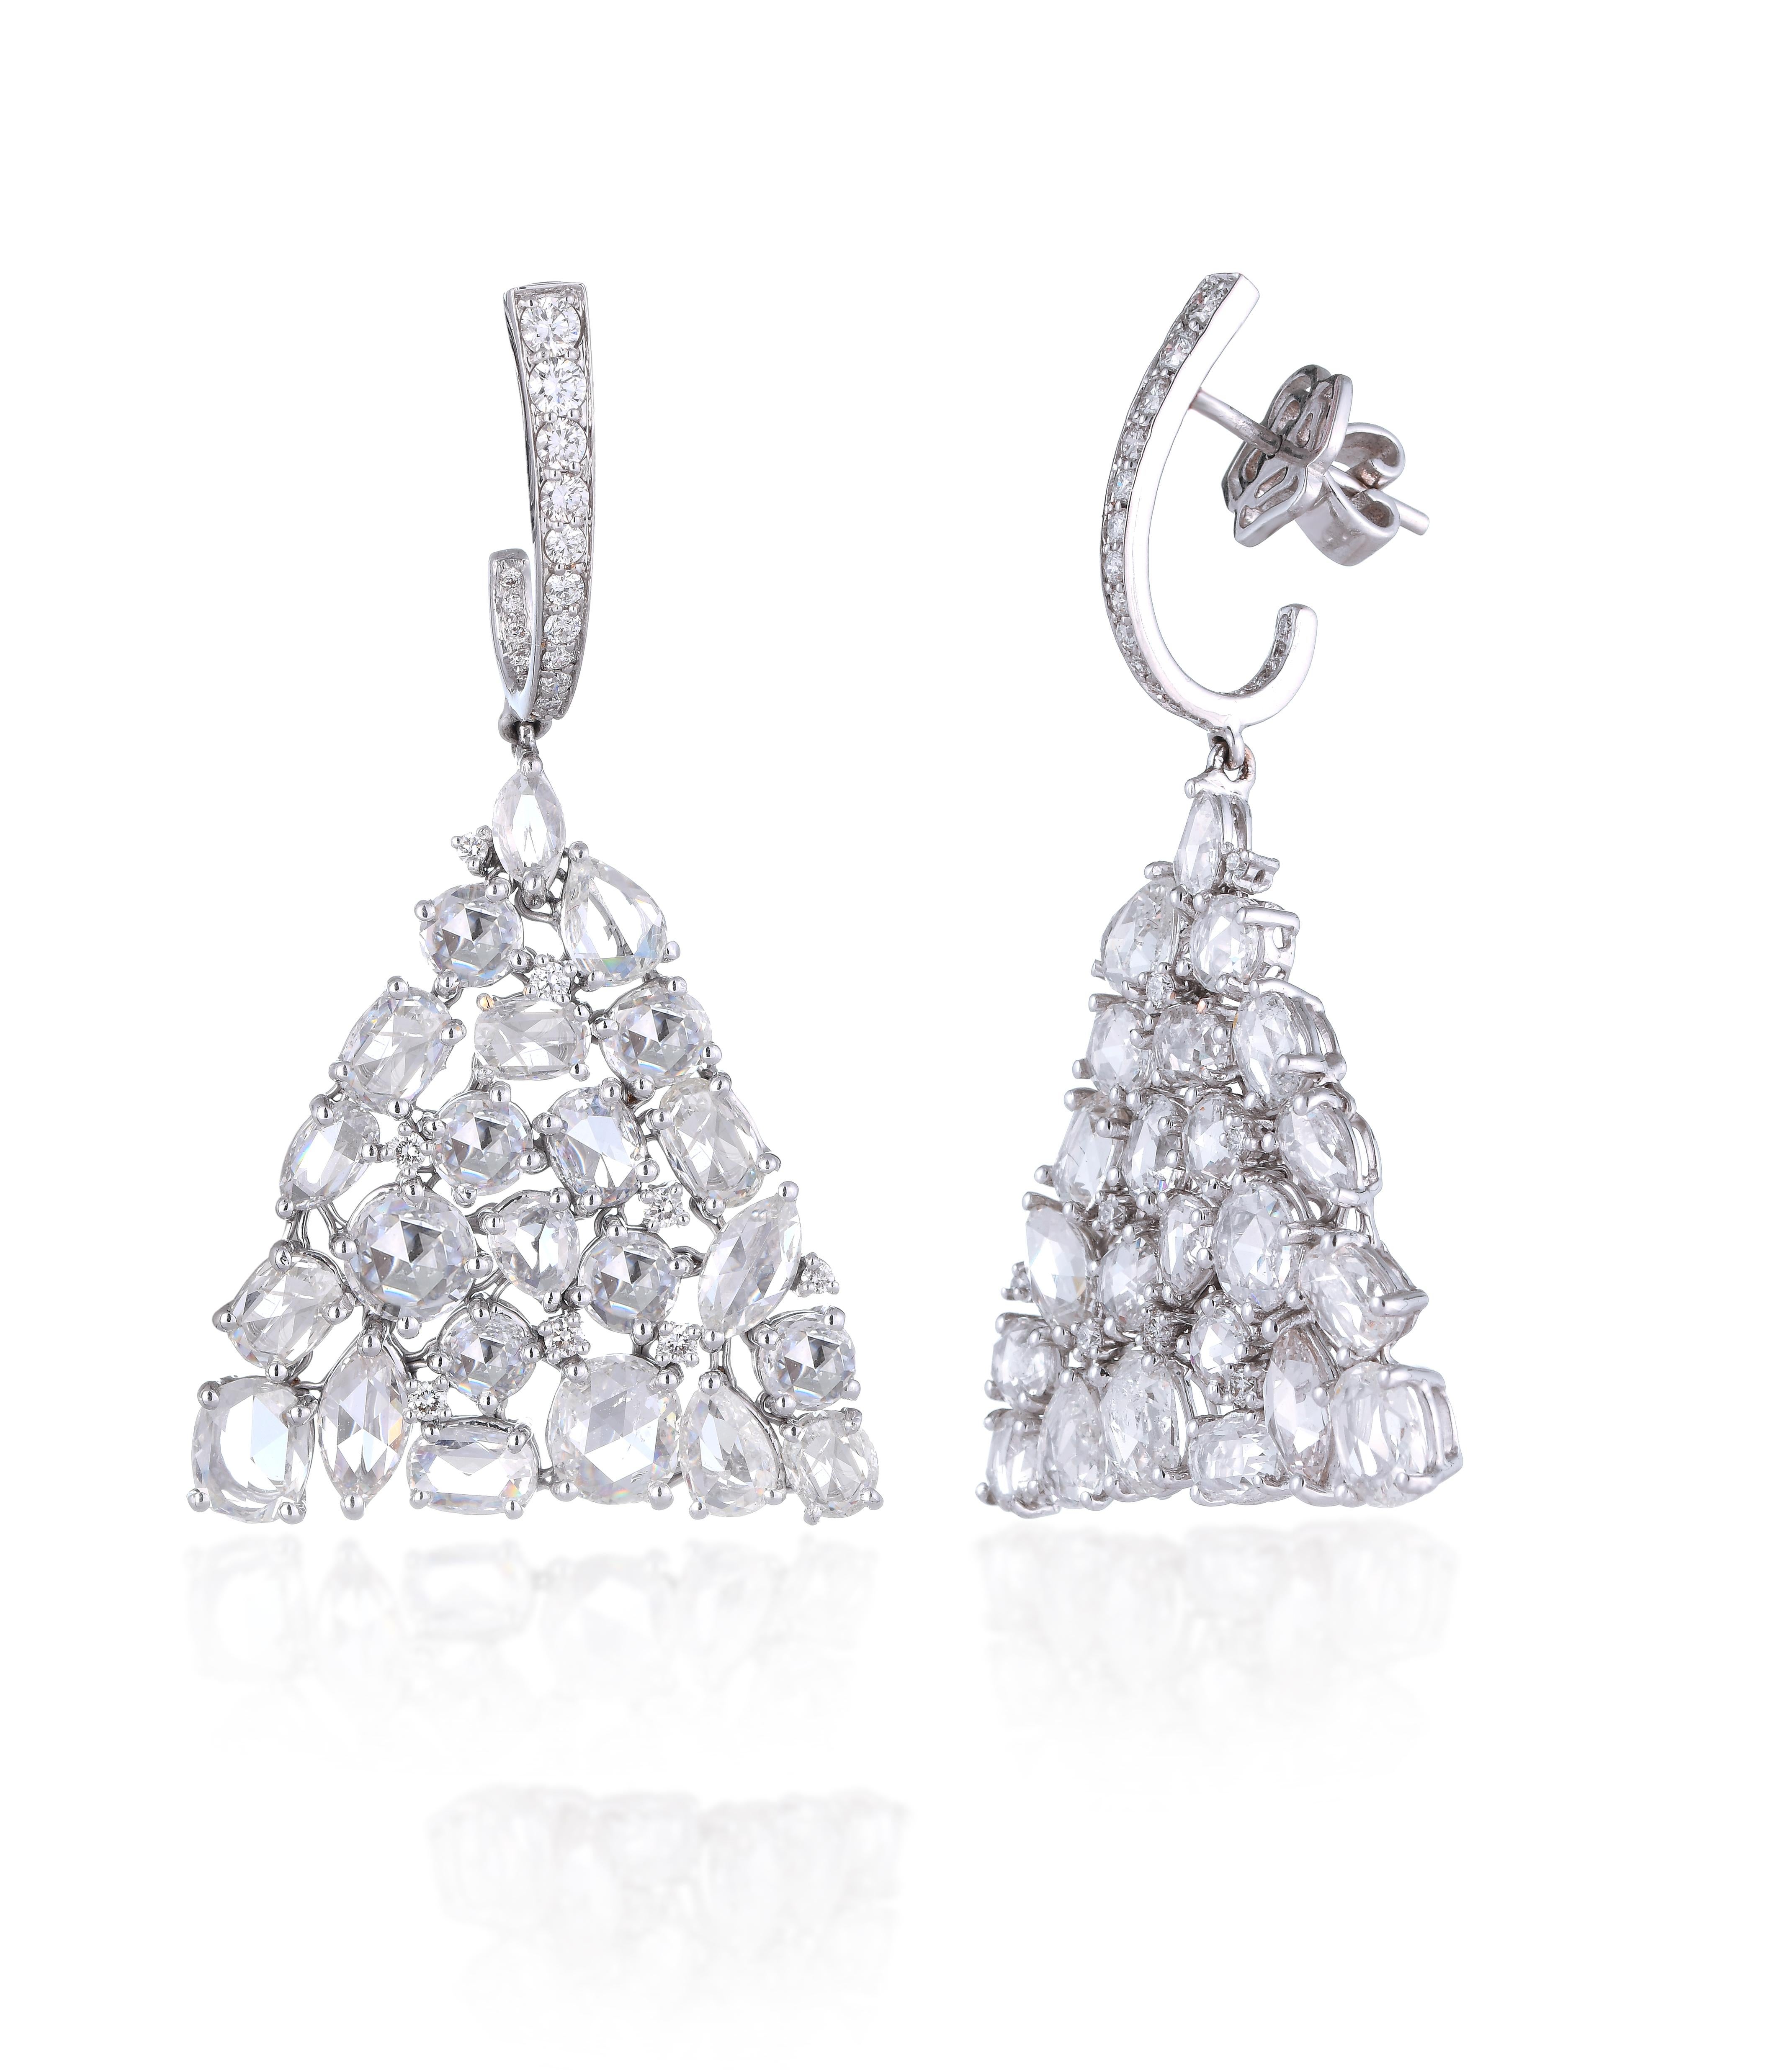 Fancy shaped rose cut diamonds coupled with full cut diamond (13.31carats) forming a remarkable pair of weightless earrings, mounted in 18kt white gold. 